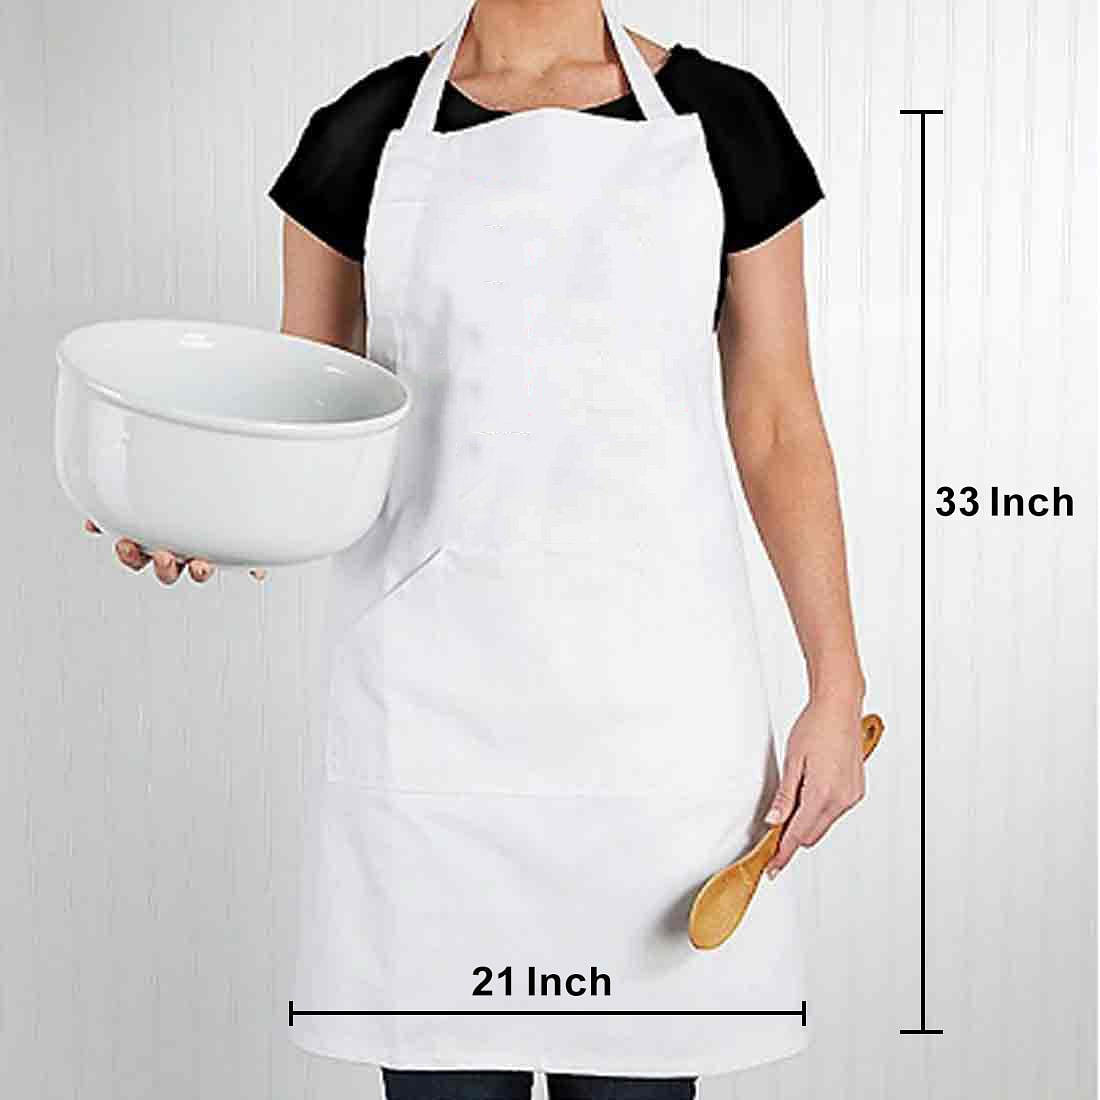 Apron For Kitchen for Mom Mothers Day Gift  - Mommy Nutcase